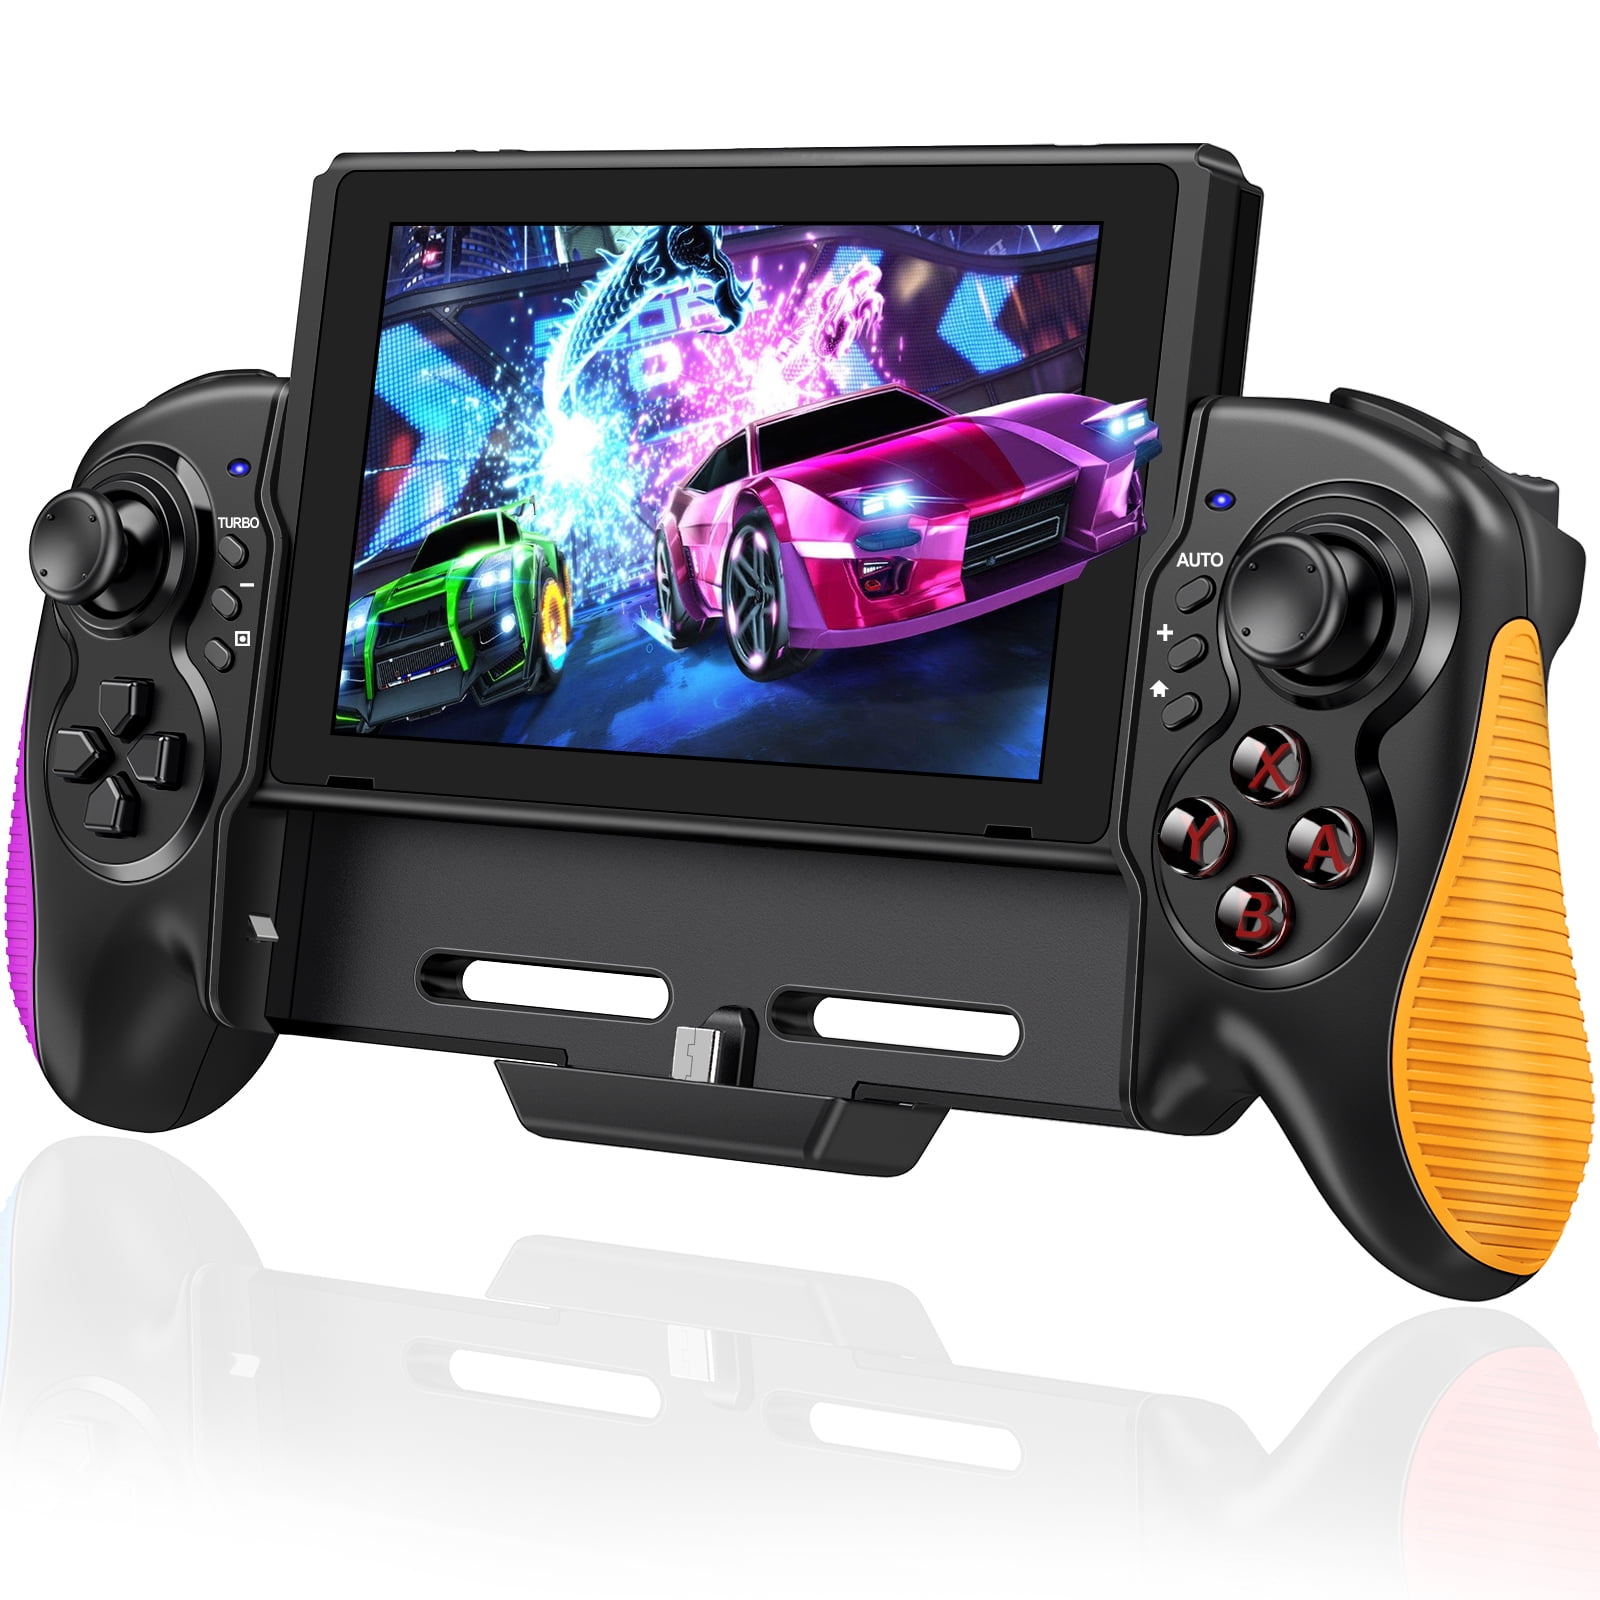 Switch Controller for Nintendo Switch/OLED,ESYWEN Switch Joy-Con with  Handheld Grip Double Motor Vibration Built-in 6-Axis Gyro  Joystick,Replacement